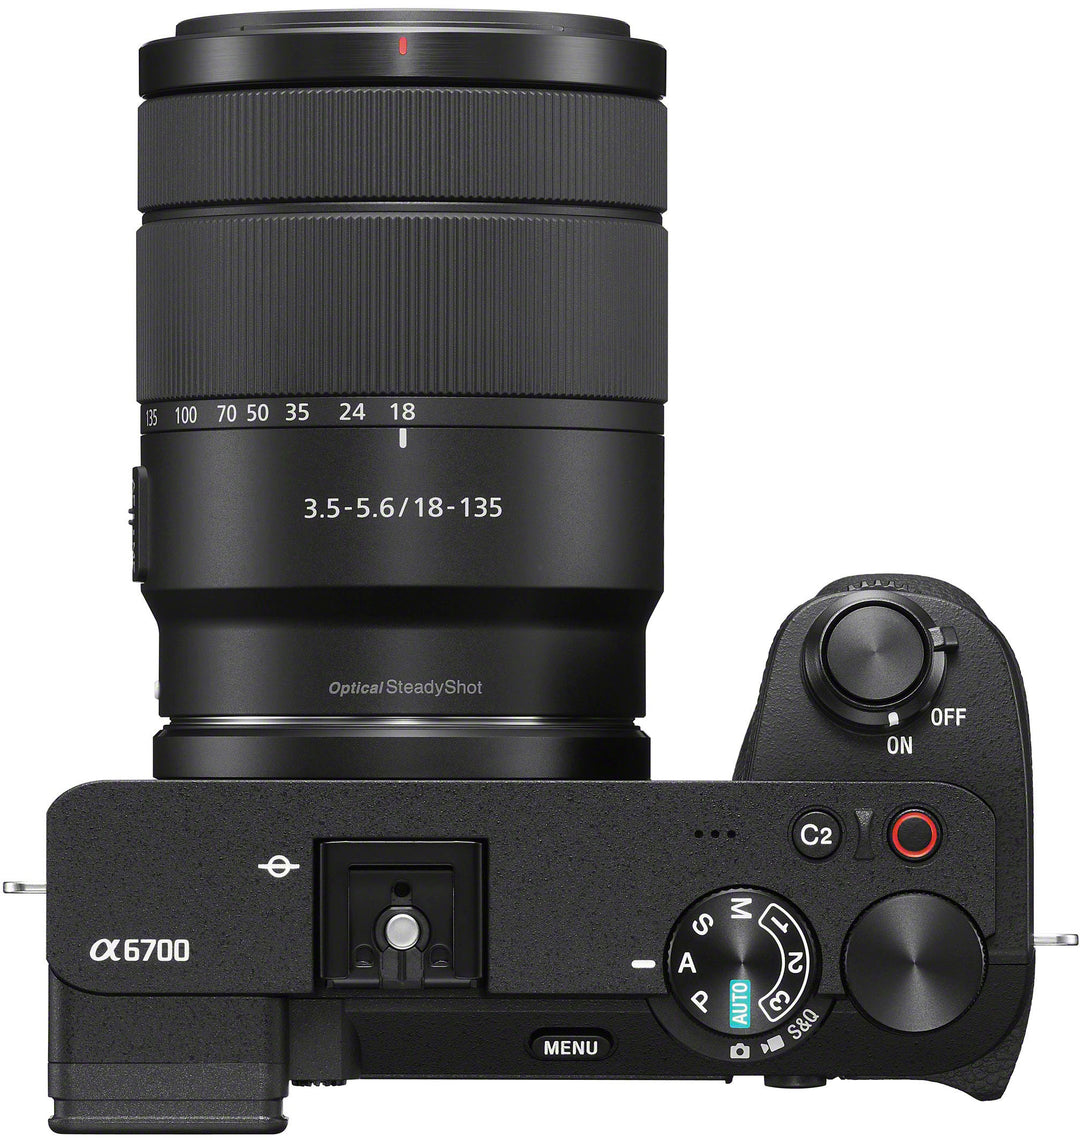 Sony - Alpha 6700 - APS-C Mirrorless Camera with E 18-135 mm Lens - Black_4